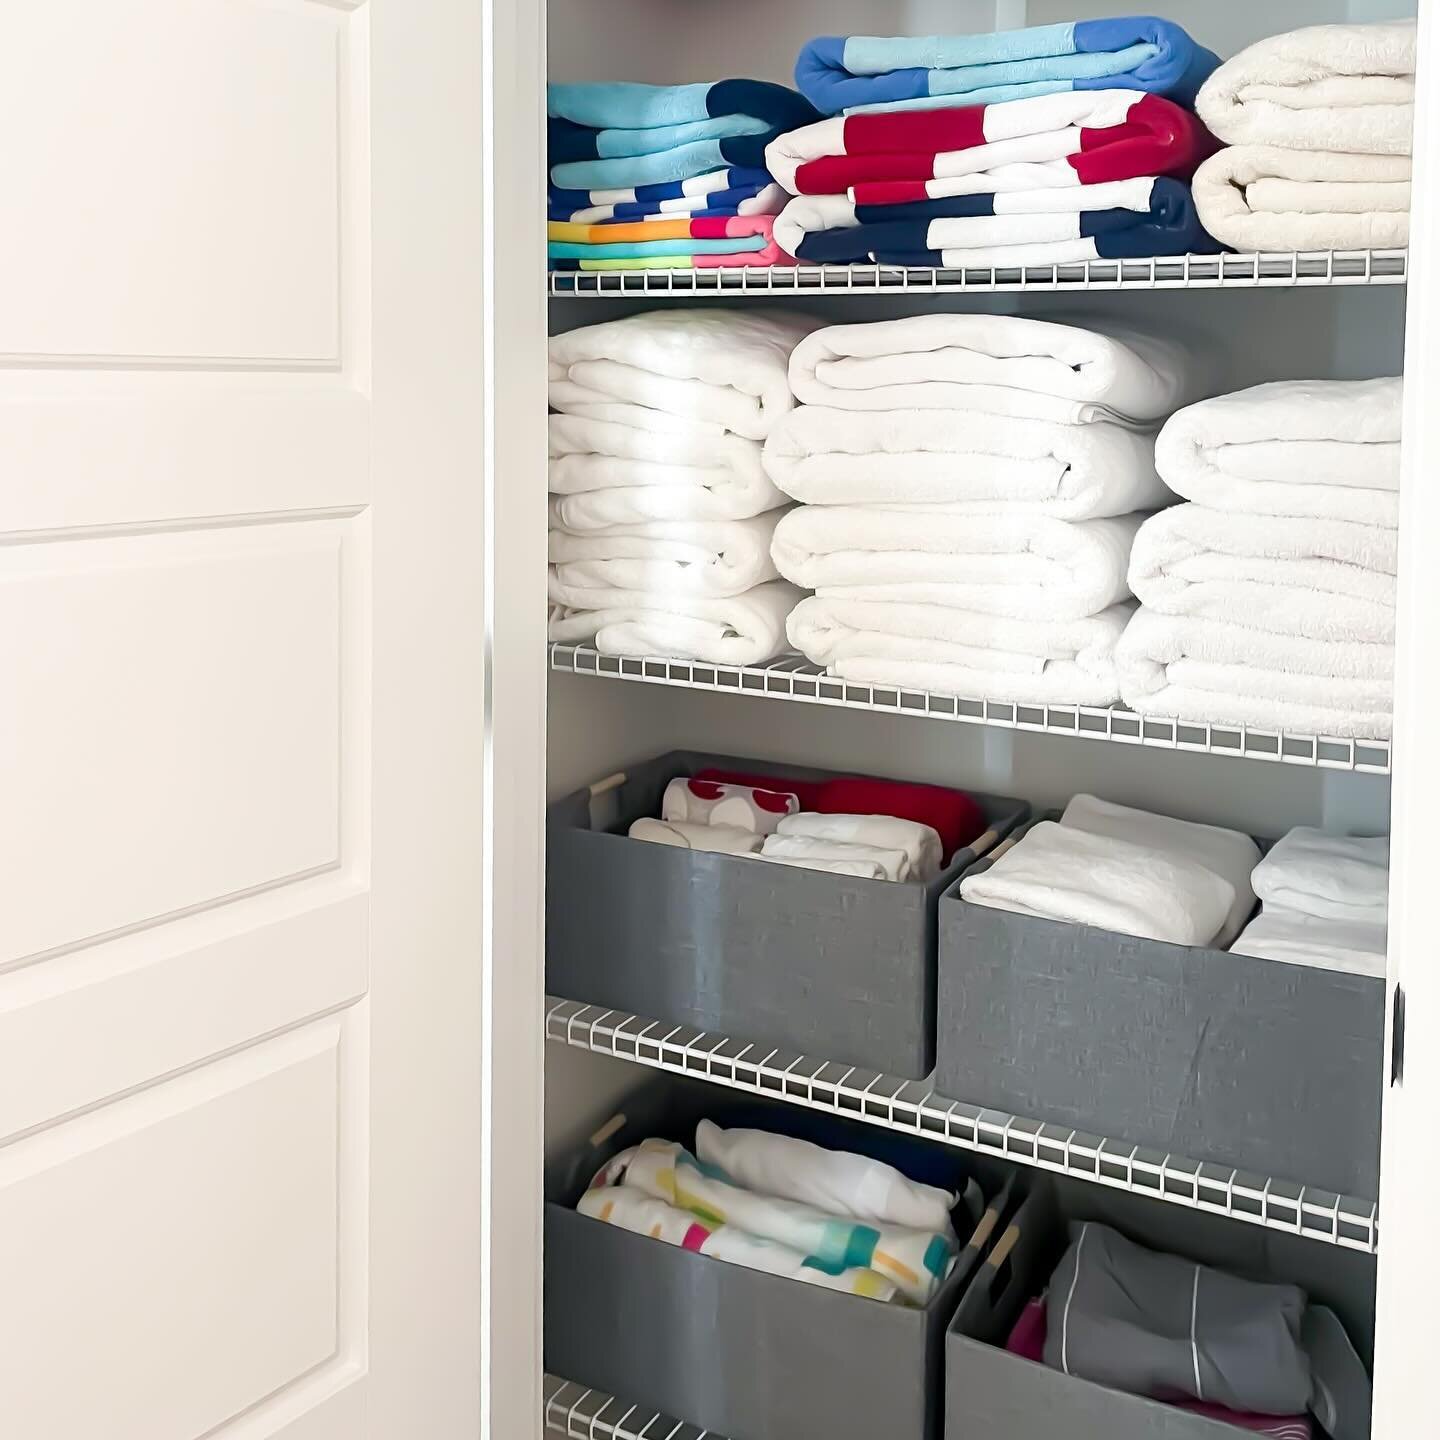 Small spaces can be the first to get out of hand.  In this home, we recommended a closet swap to maximize the space for both linens and towels. 

Everything now has a dedicated space, streamlining laundry day 🧺

#sortandstore #beforeandafter #linenc